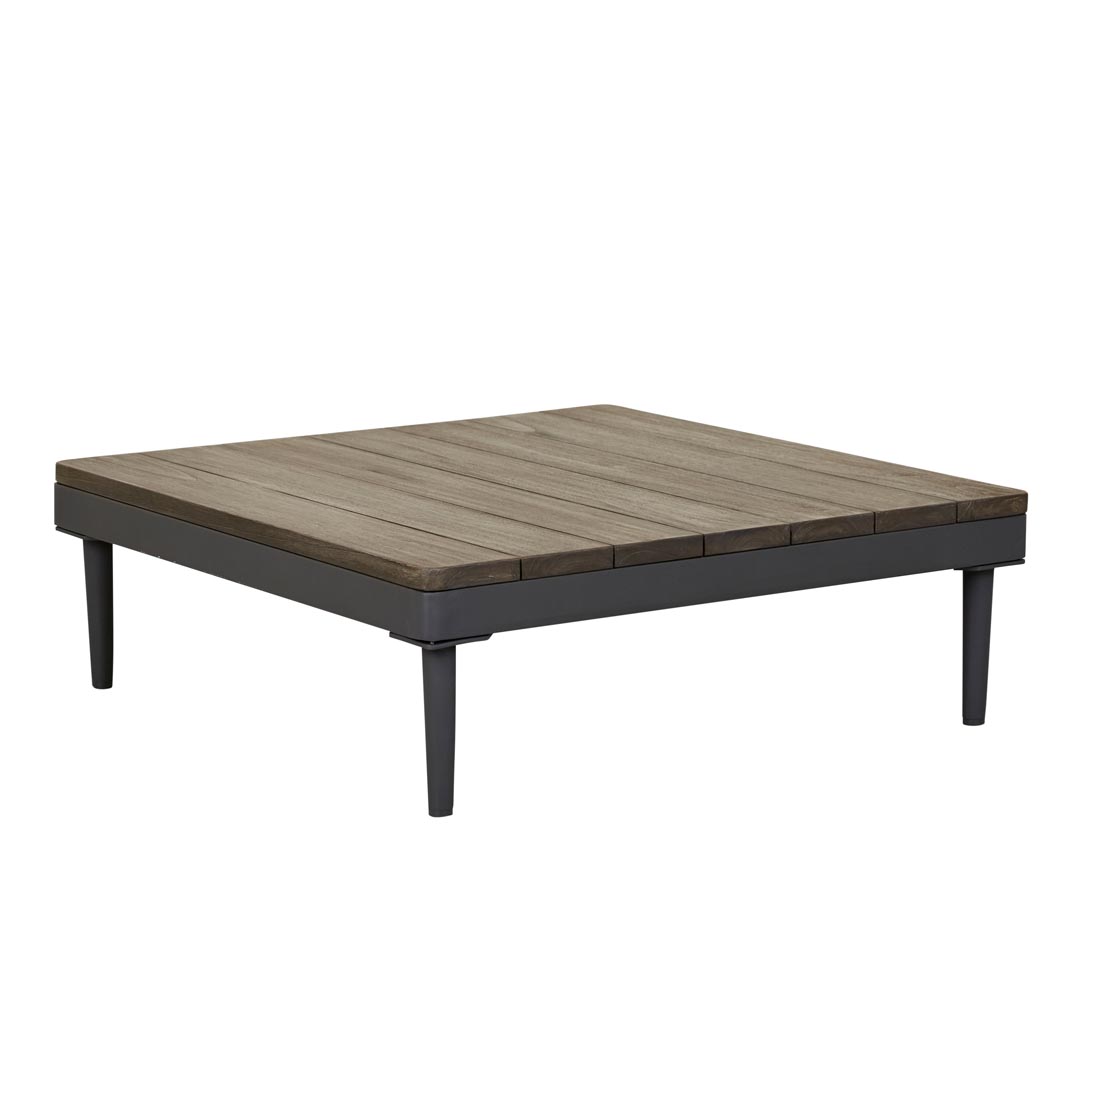 Cabana Weave Square Coffee Table image 8